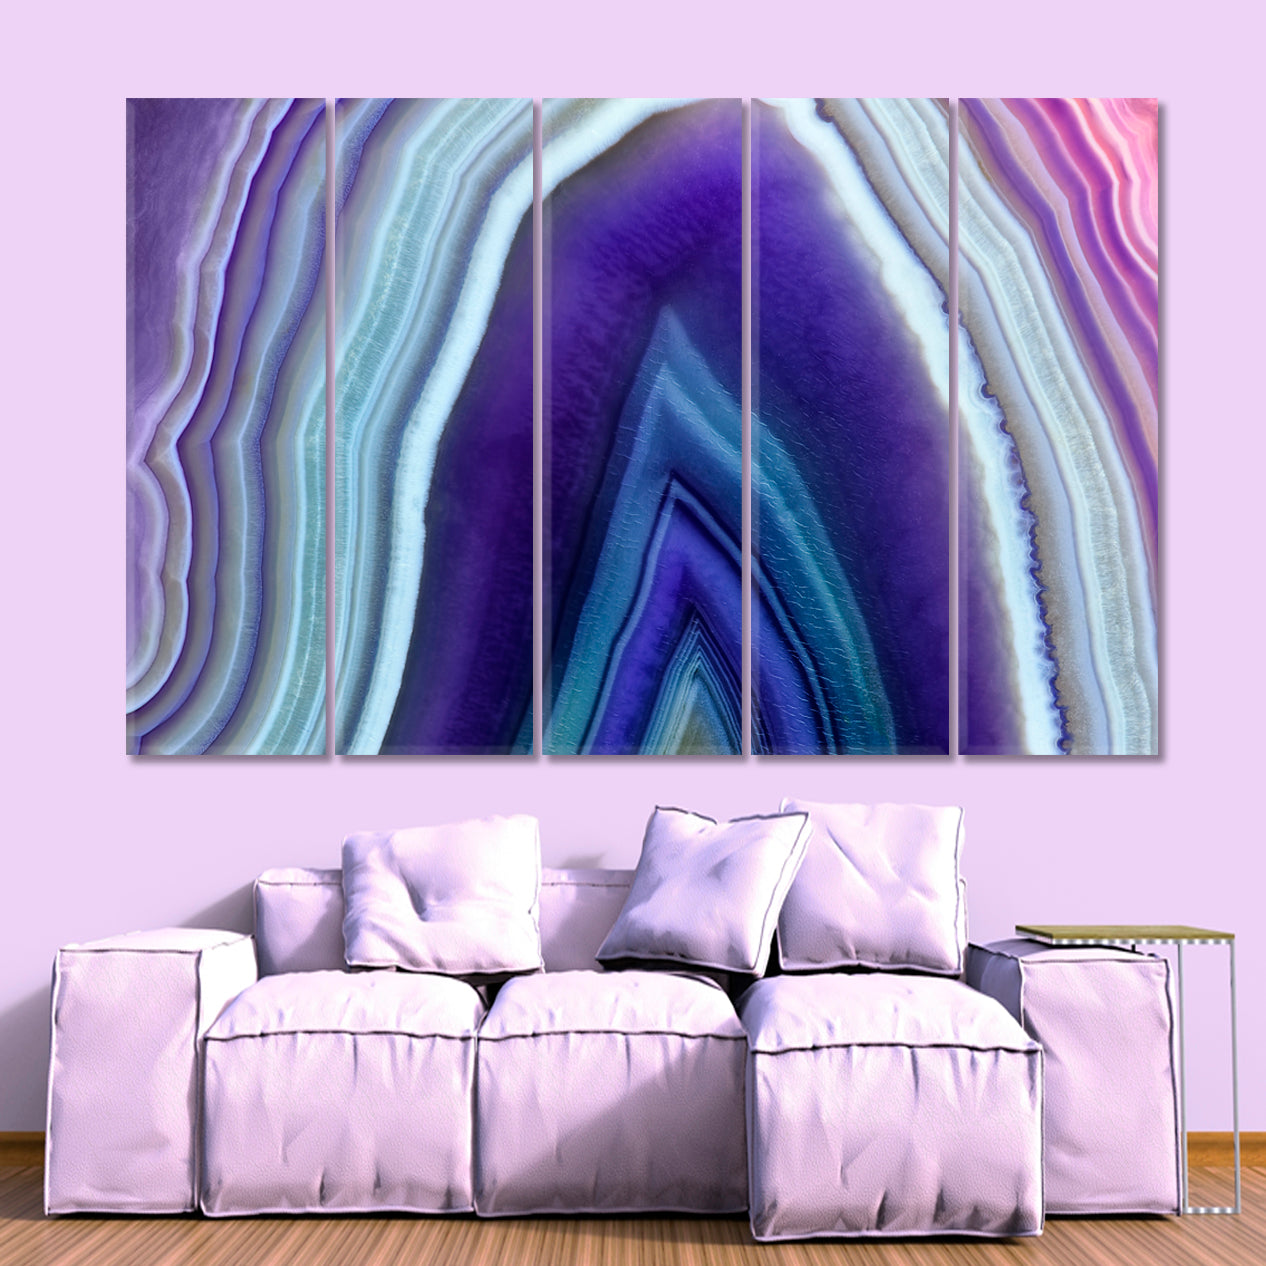 Amazing Violet Agate Crystal Cross Section Purple Abstract Structure Abstract Art Print Artesty 5 panels 36" x 24" 